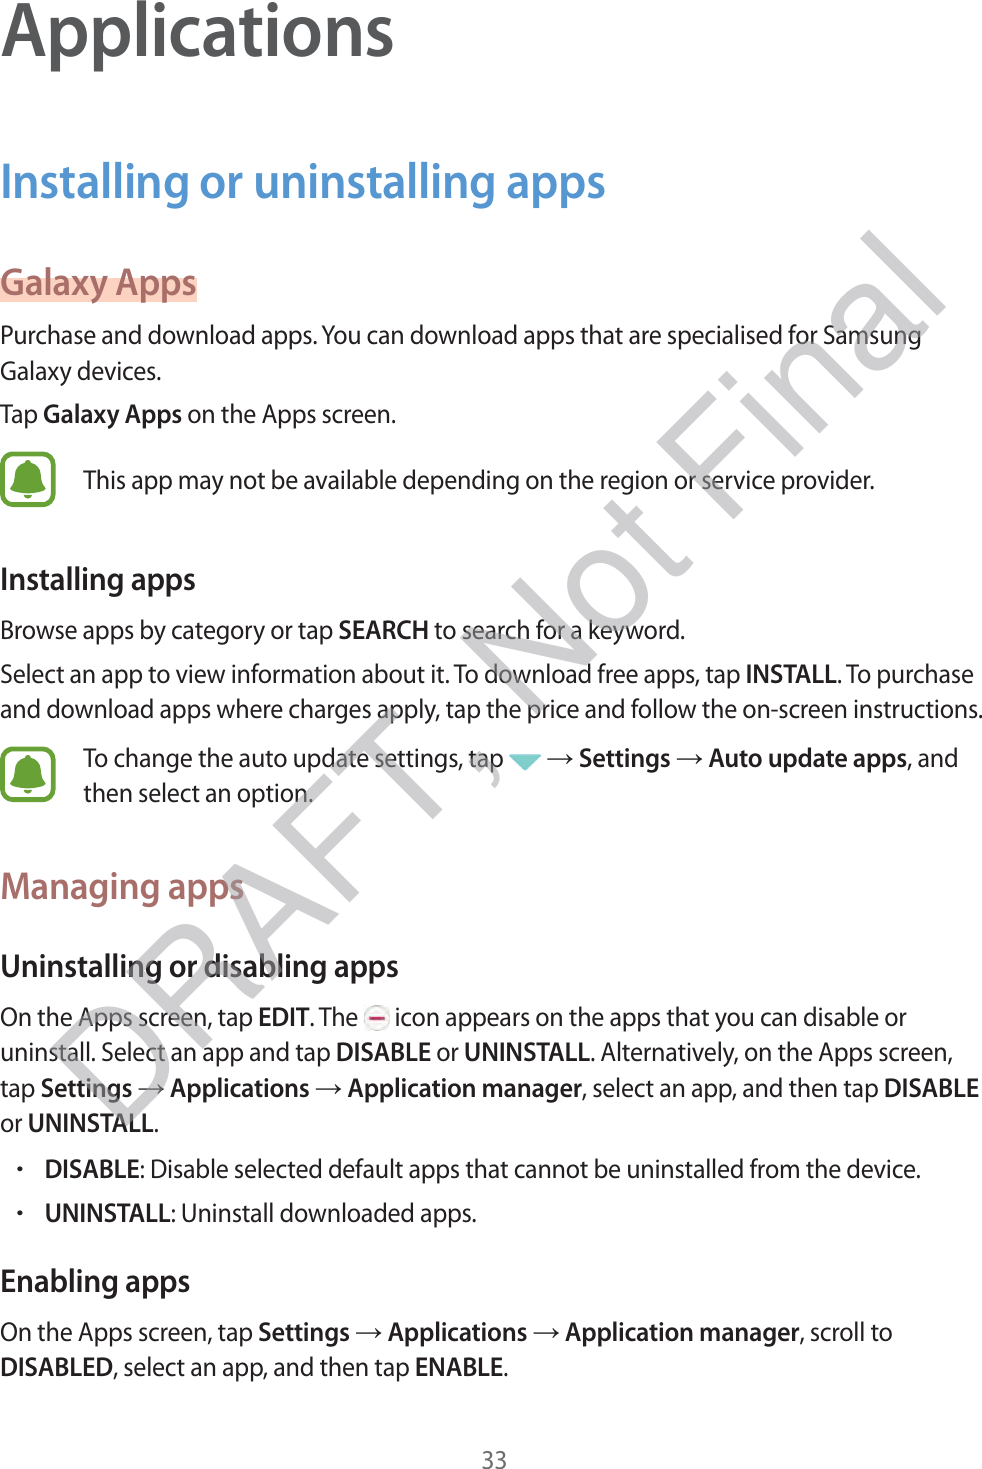 33ApplicationsInstalling or uninstalling appsGalaxy AppsPurchase and download apps. You can download apps that are specialised for Samsung Galaxy devices.Tap Galaxy Apps on the Apps screen.This app may not be available depending on the region or service provider.Installing appsBrowse apps by category or tap SEARCH to search for a keyword.Select an app to view information about it. To download free apps, tap INSTALL. To purchase and download apps where charges apply, tap the price and follow the on-screen instructions.To change the auto update settings, tap   → Settings → Auto update apps, and then select an option.Managing appsUninstalling or disabling appsOn the Apps screen, tap EDIT. The   icon appears on the apps that you can disable or uninstall. Select an app and tap DISABLE or UNINSTALL. Alternatively, on the Apps screen, tap Settings → Applications → Application manager, select an app, and then tap DISABLE or UNINSTALL.rDISABLE: Disable selected default apps that cannot be uninstalled from the device.rUNINSTALL: Uninstall downloaded apps.Enabling appsOn the Apps screen, tap Settings → Applications → Application manager, scroll to DISABLED, select an app, and then tap ENABLE.DRAFT, Not Final